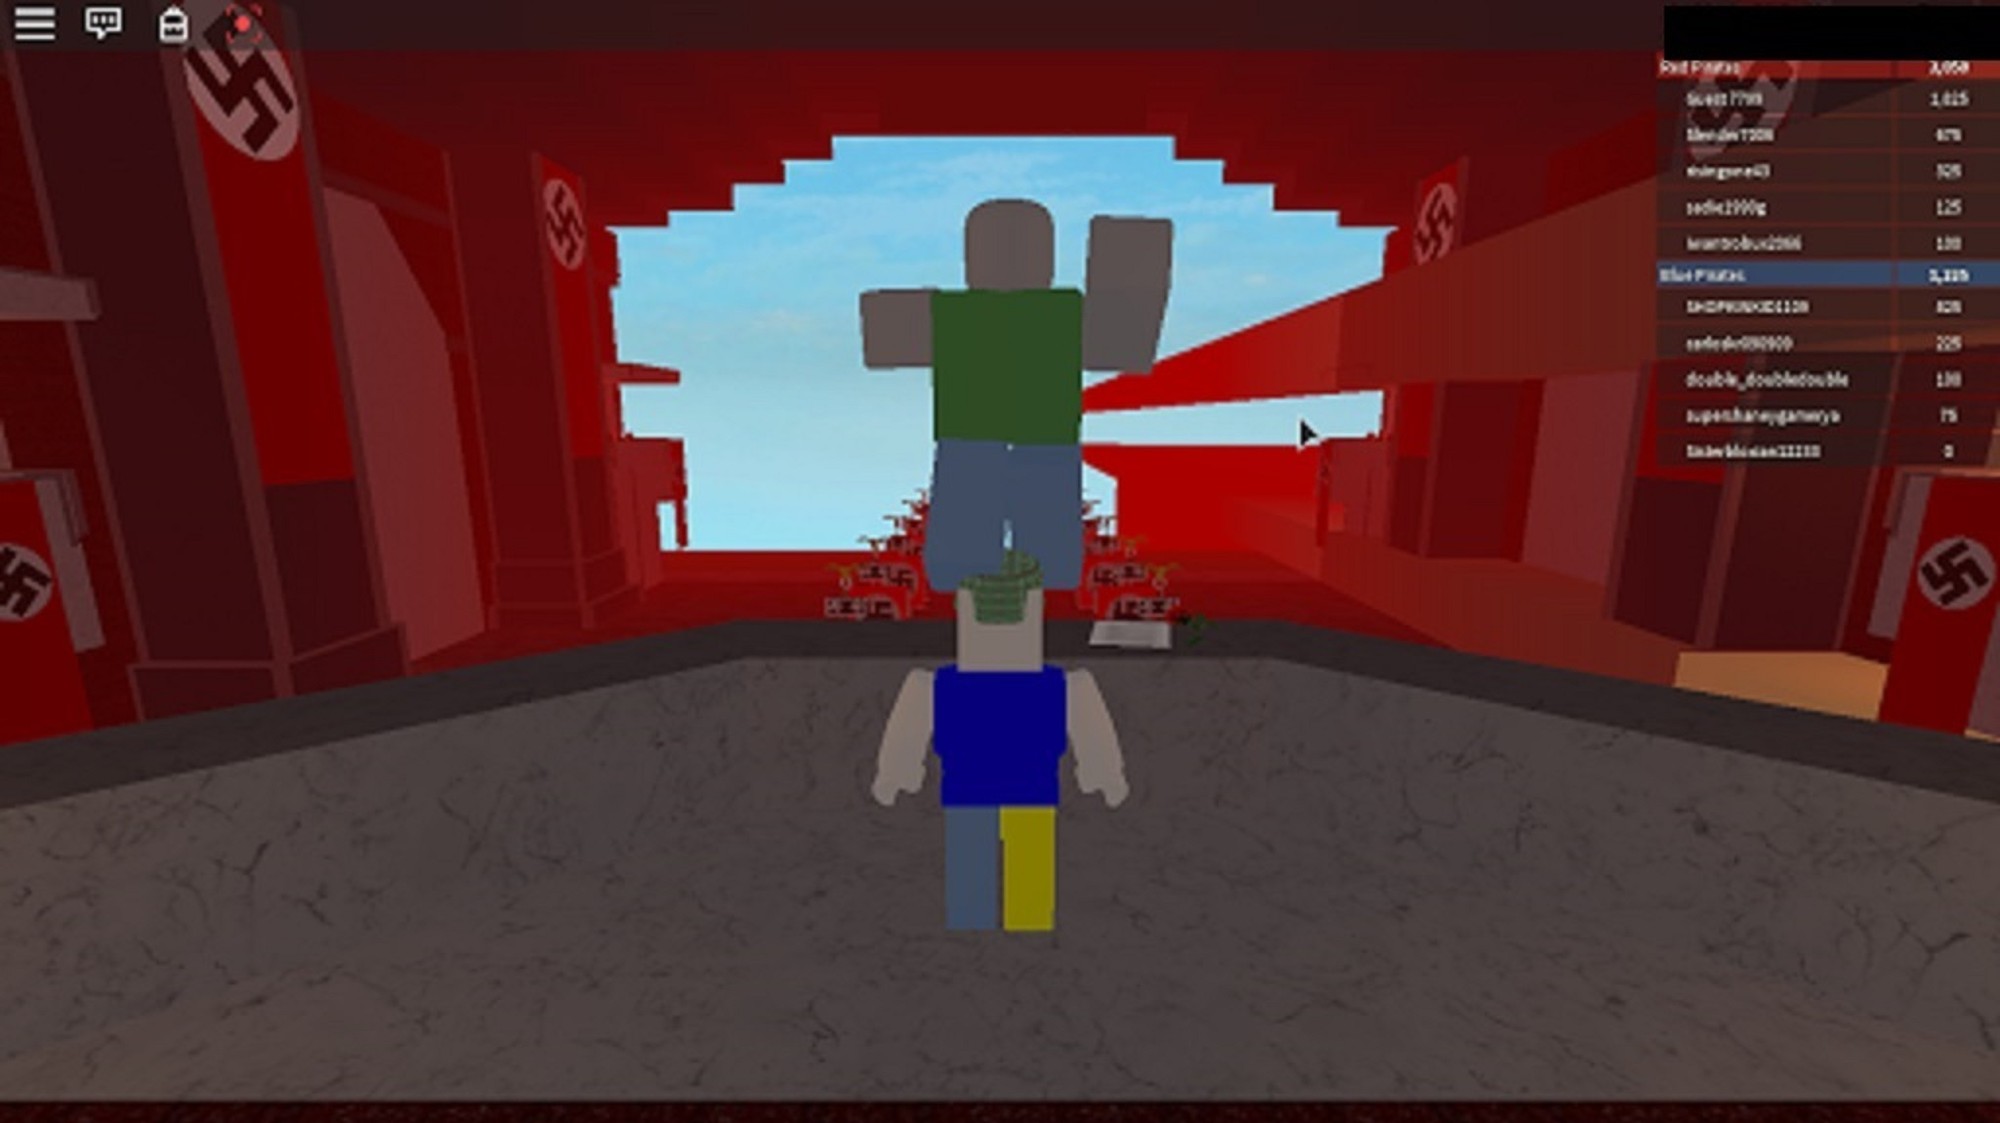 Porn and Swastikas Have Infiltrated 'Roblox' - VICE